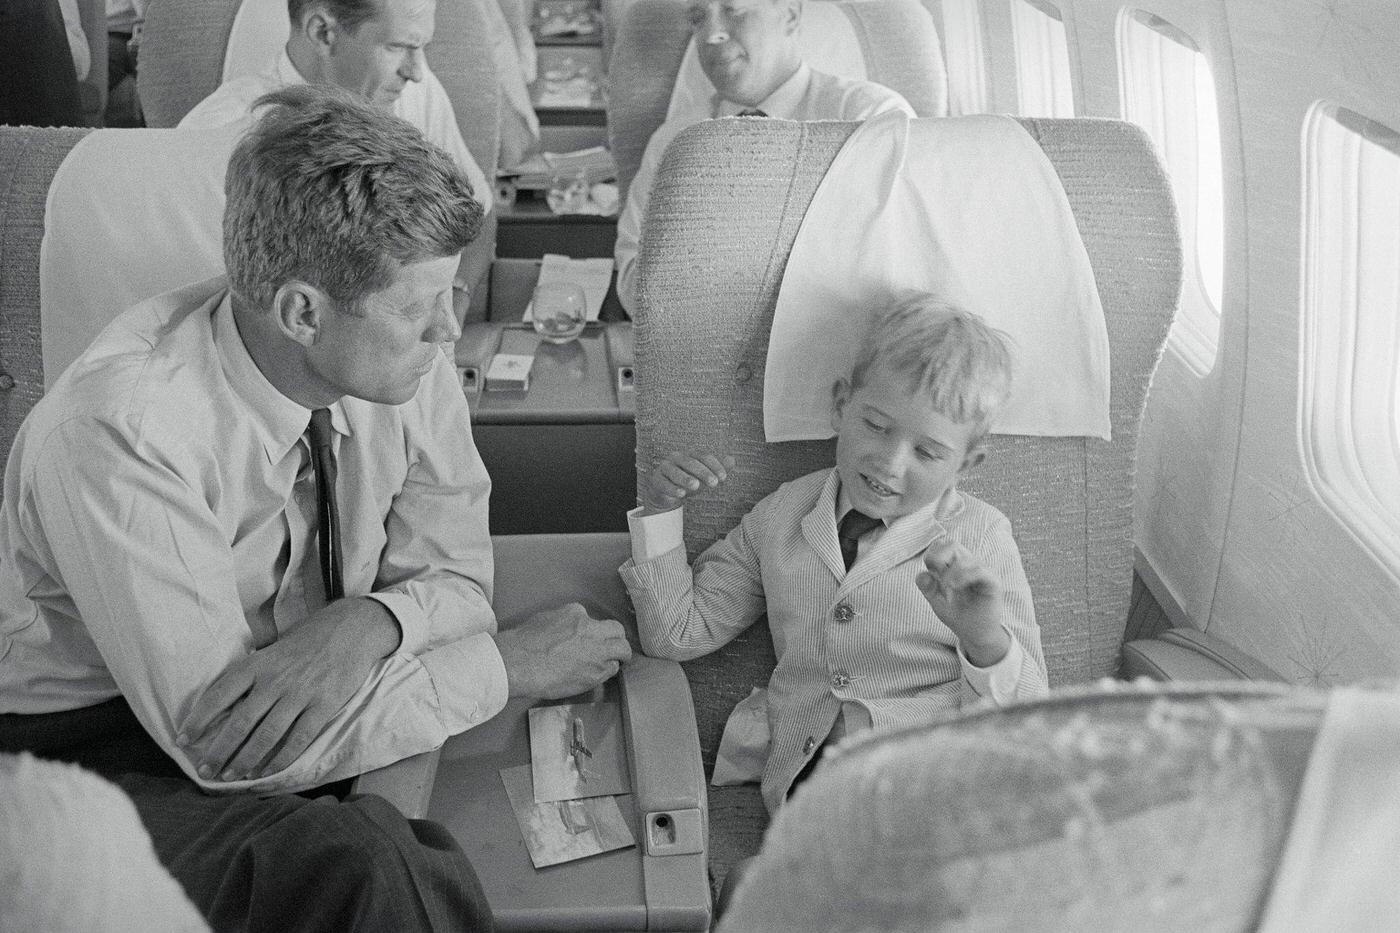 John F. Kennedy entertaining his nephew Bobby Kennedy Jr. on a flight from the Democratic National Convention.